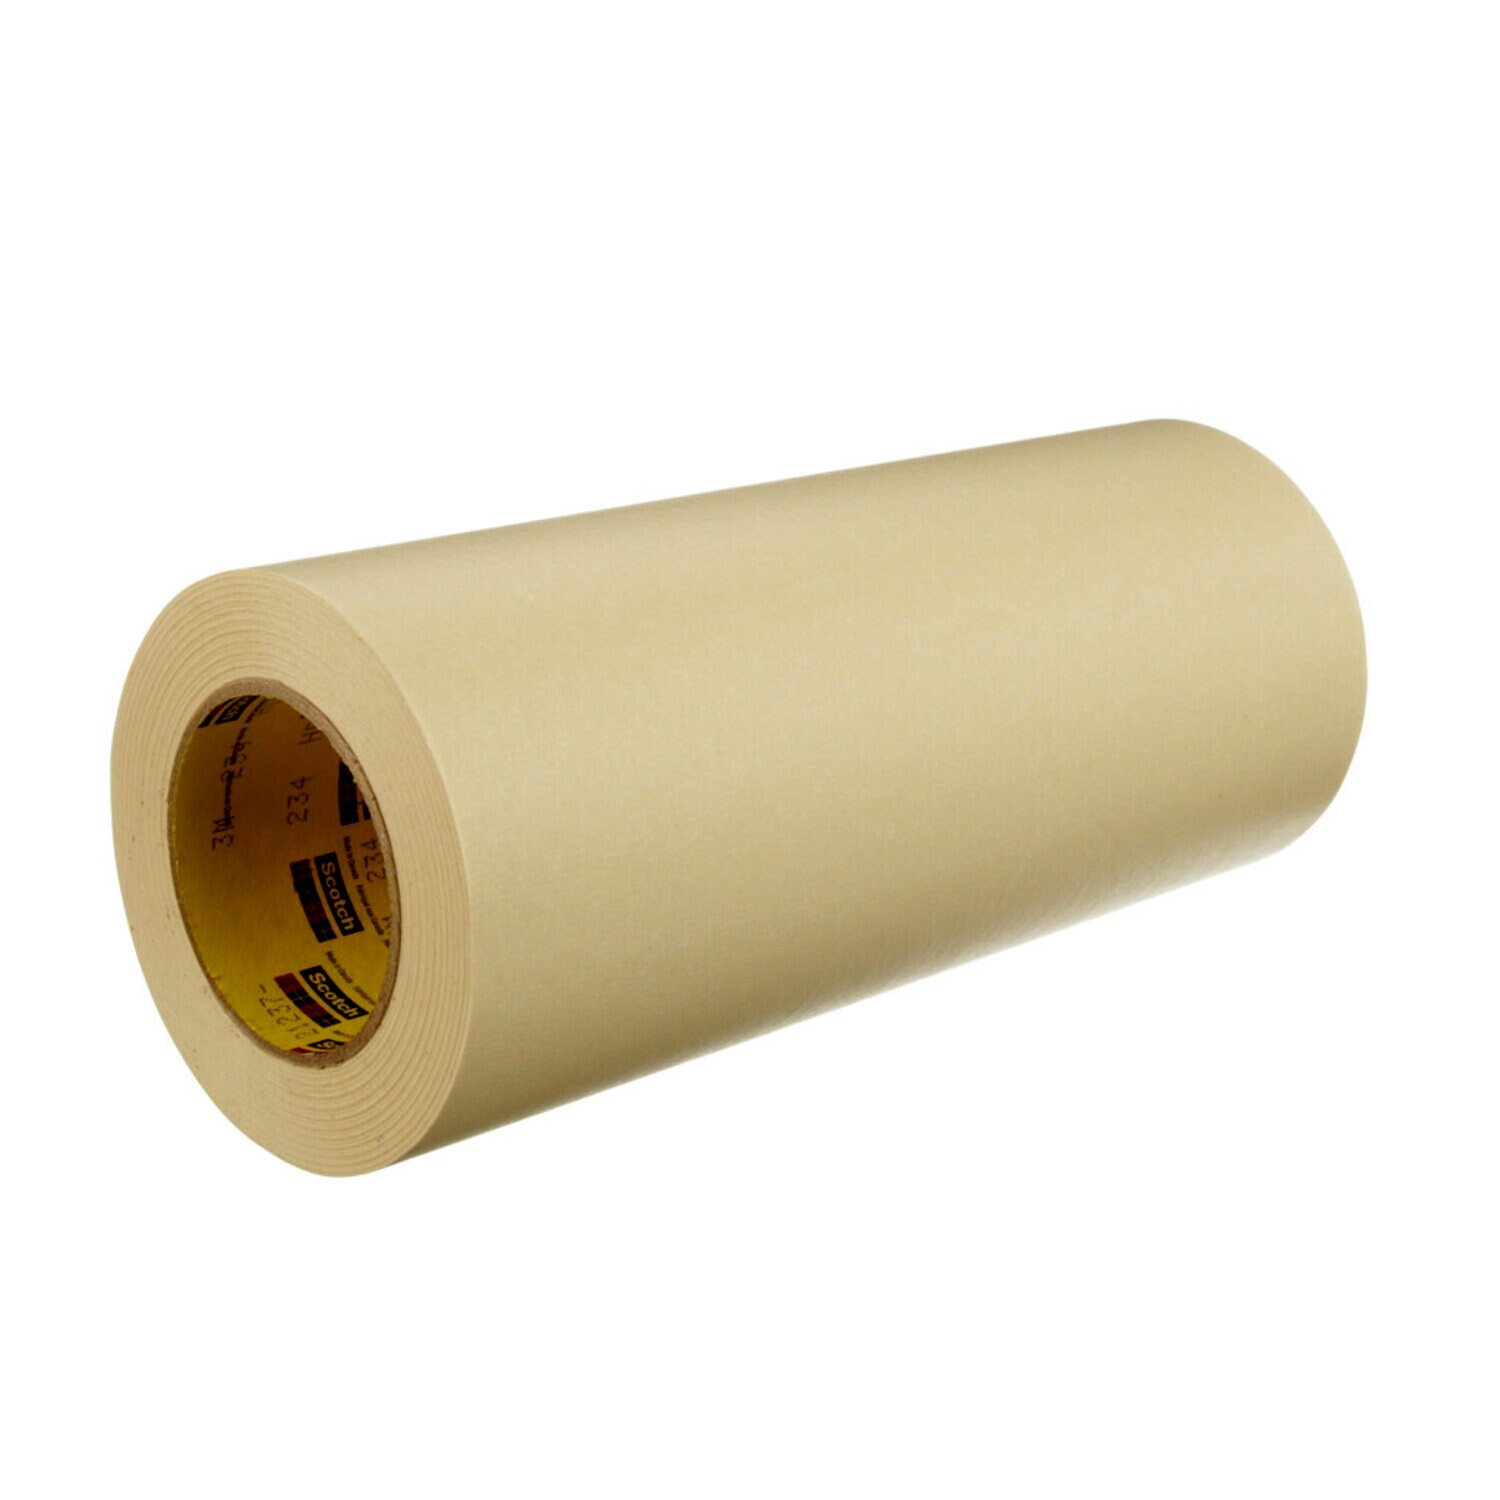 00051138947903, 3M General Purpose Masking Tape 234, Tan, 12 in x 60 yd,  5.9 mil, 4 Roll/Case, Aircraft products, masking-tapes